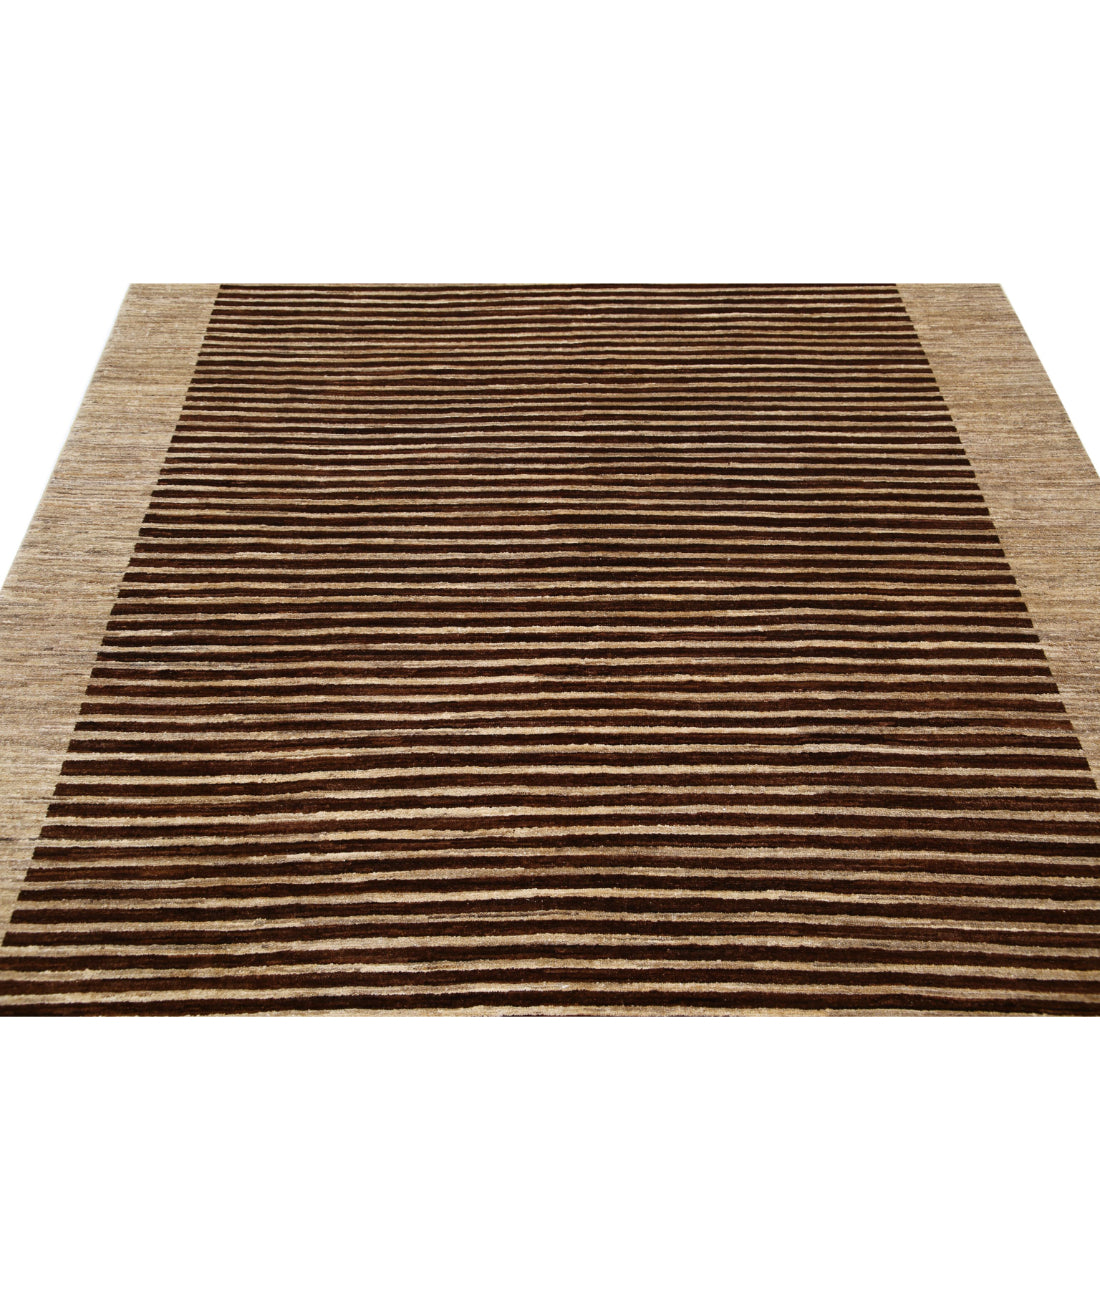 Hand Knotted Modcar Wool Rug - 6'4'' x 8'9'' 6'4'' x 8'9'' (190 X 263) / Brown / Brown